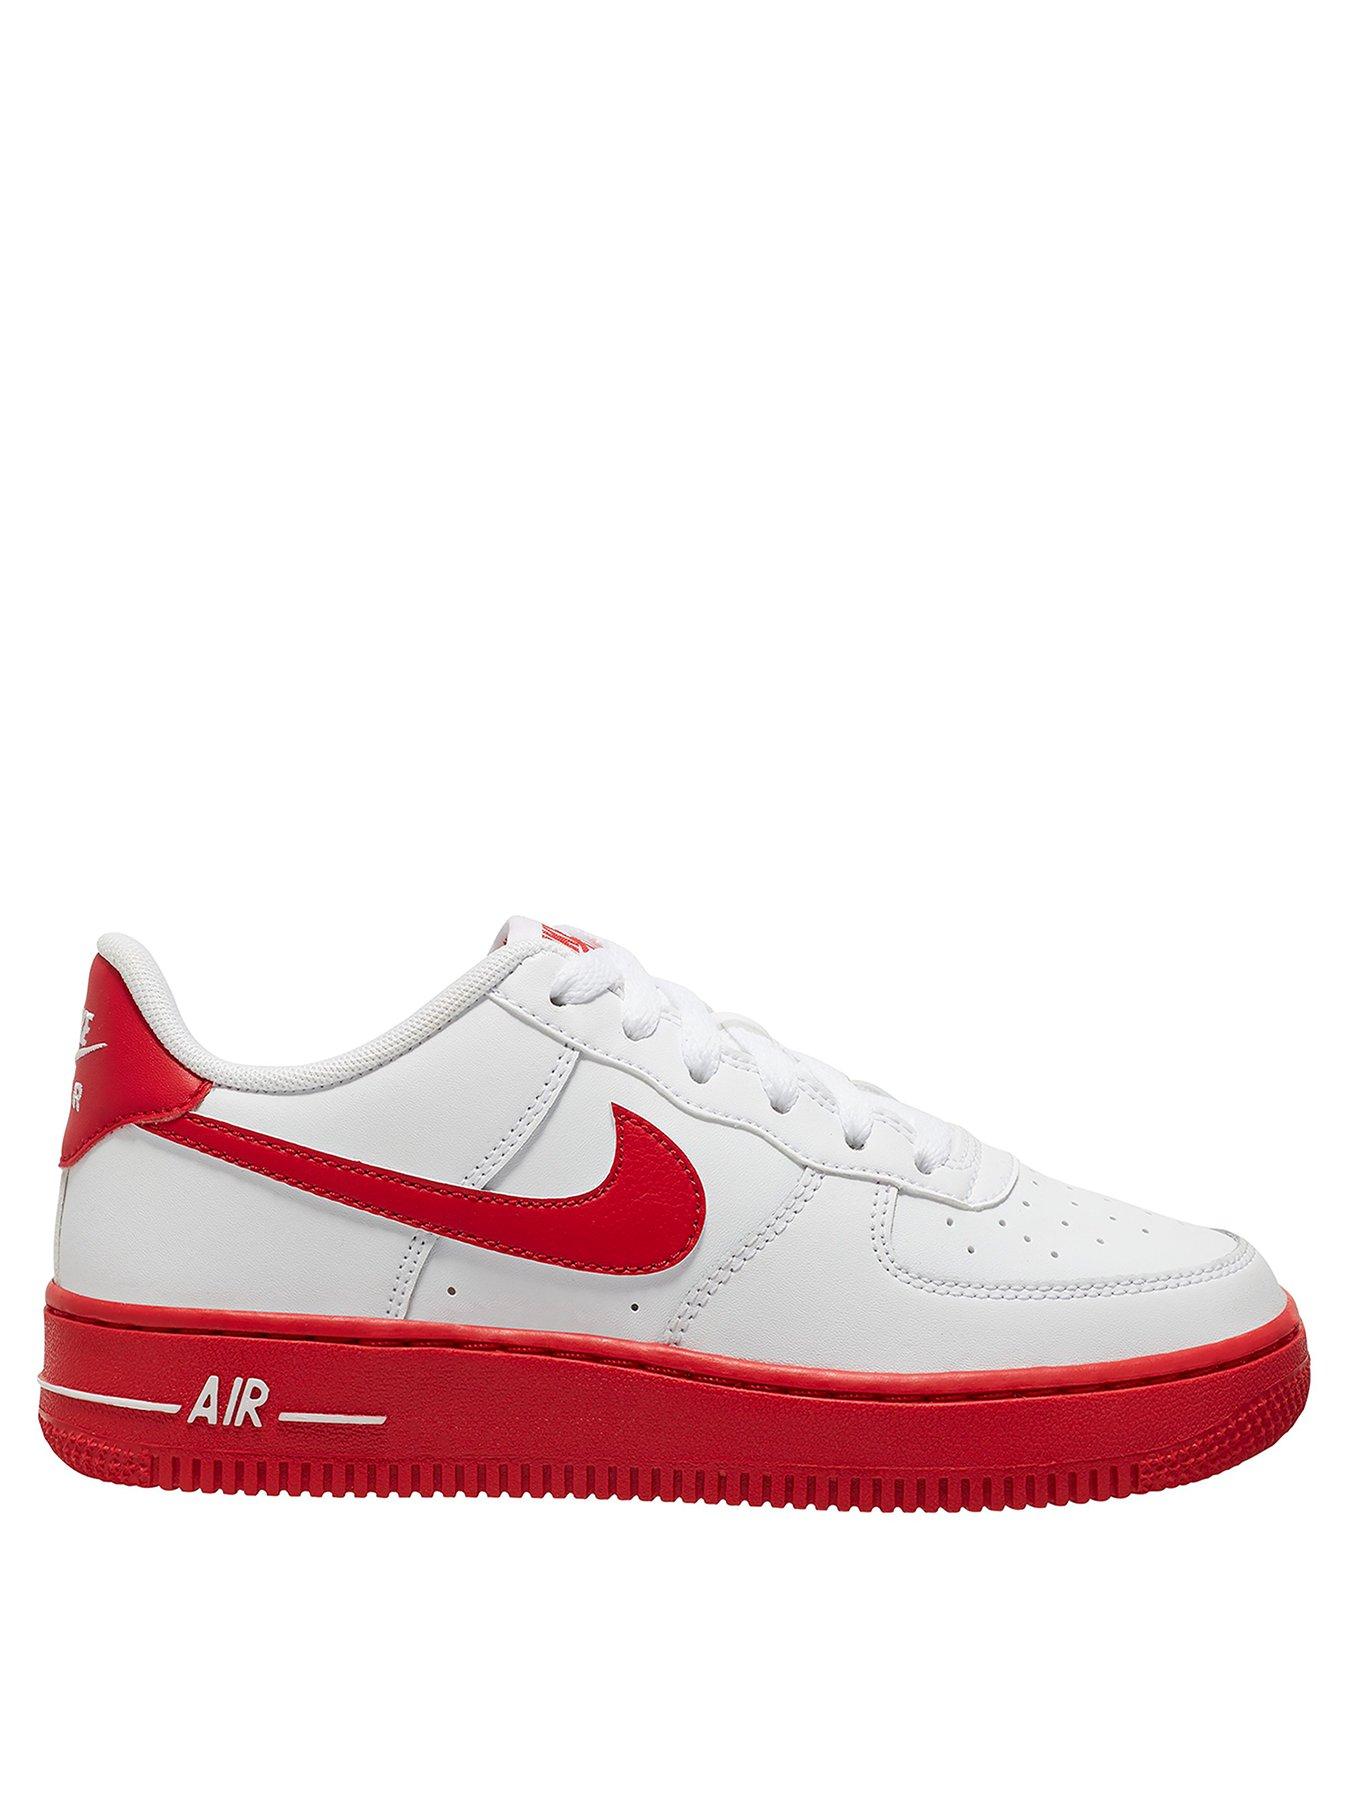 air force 1 size 4 junior